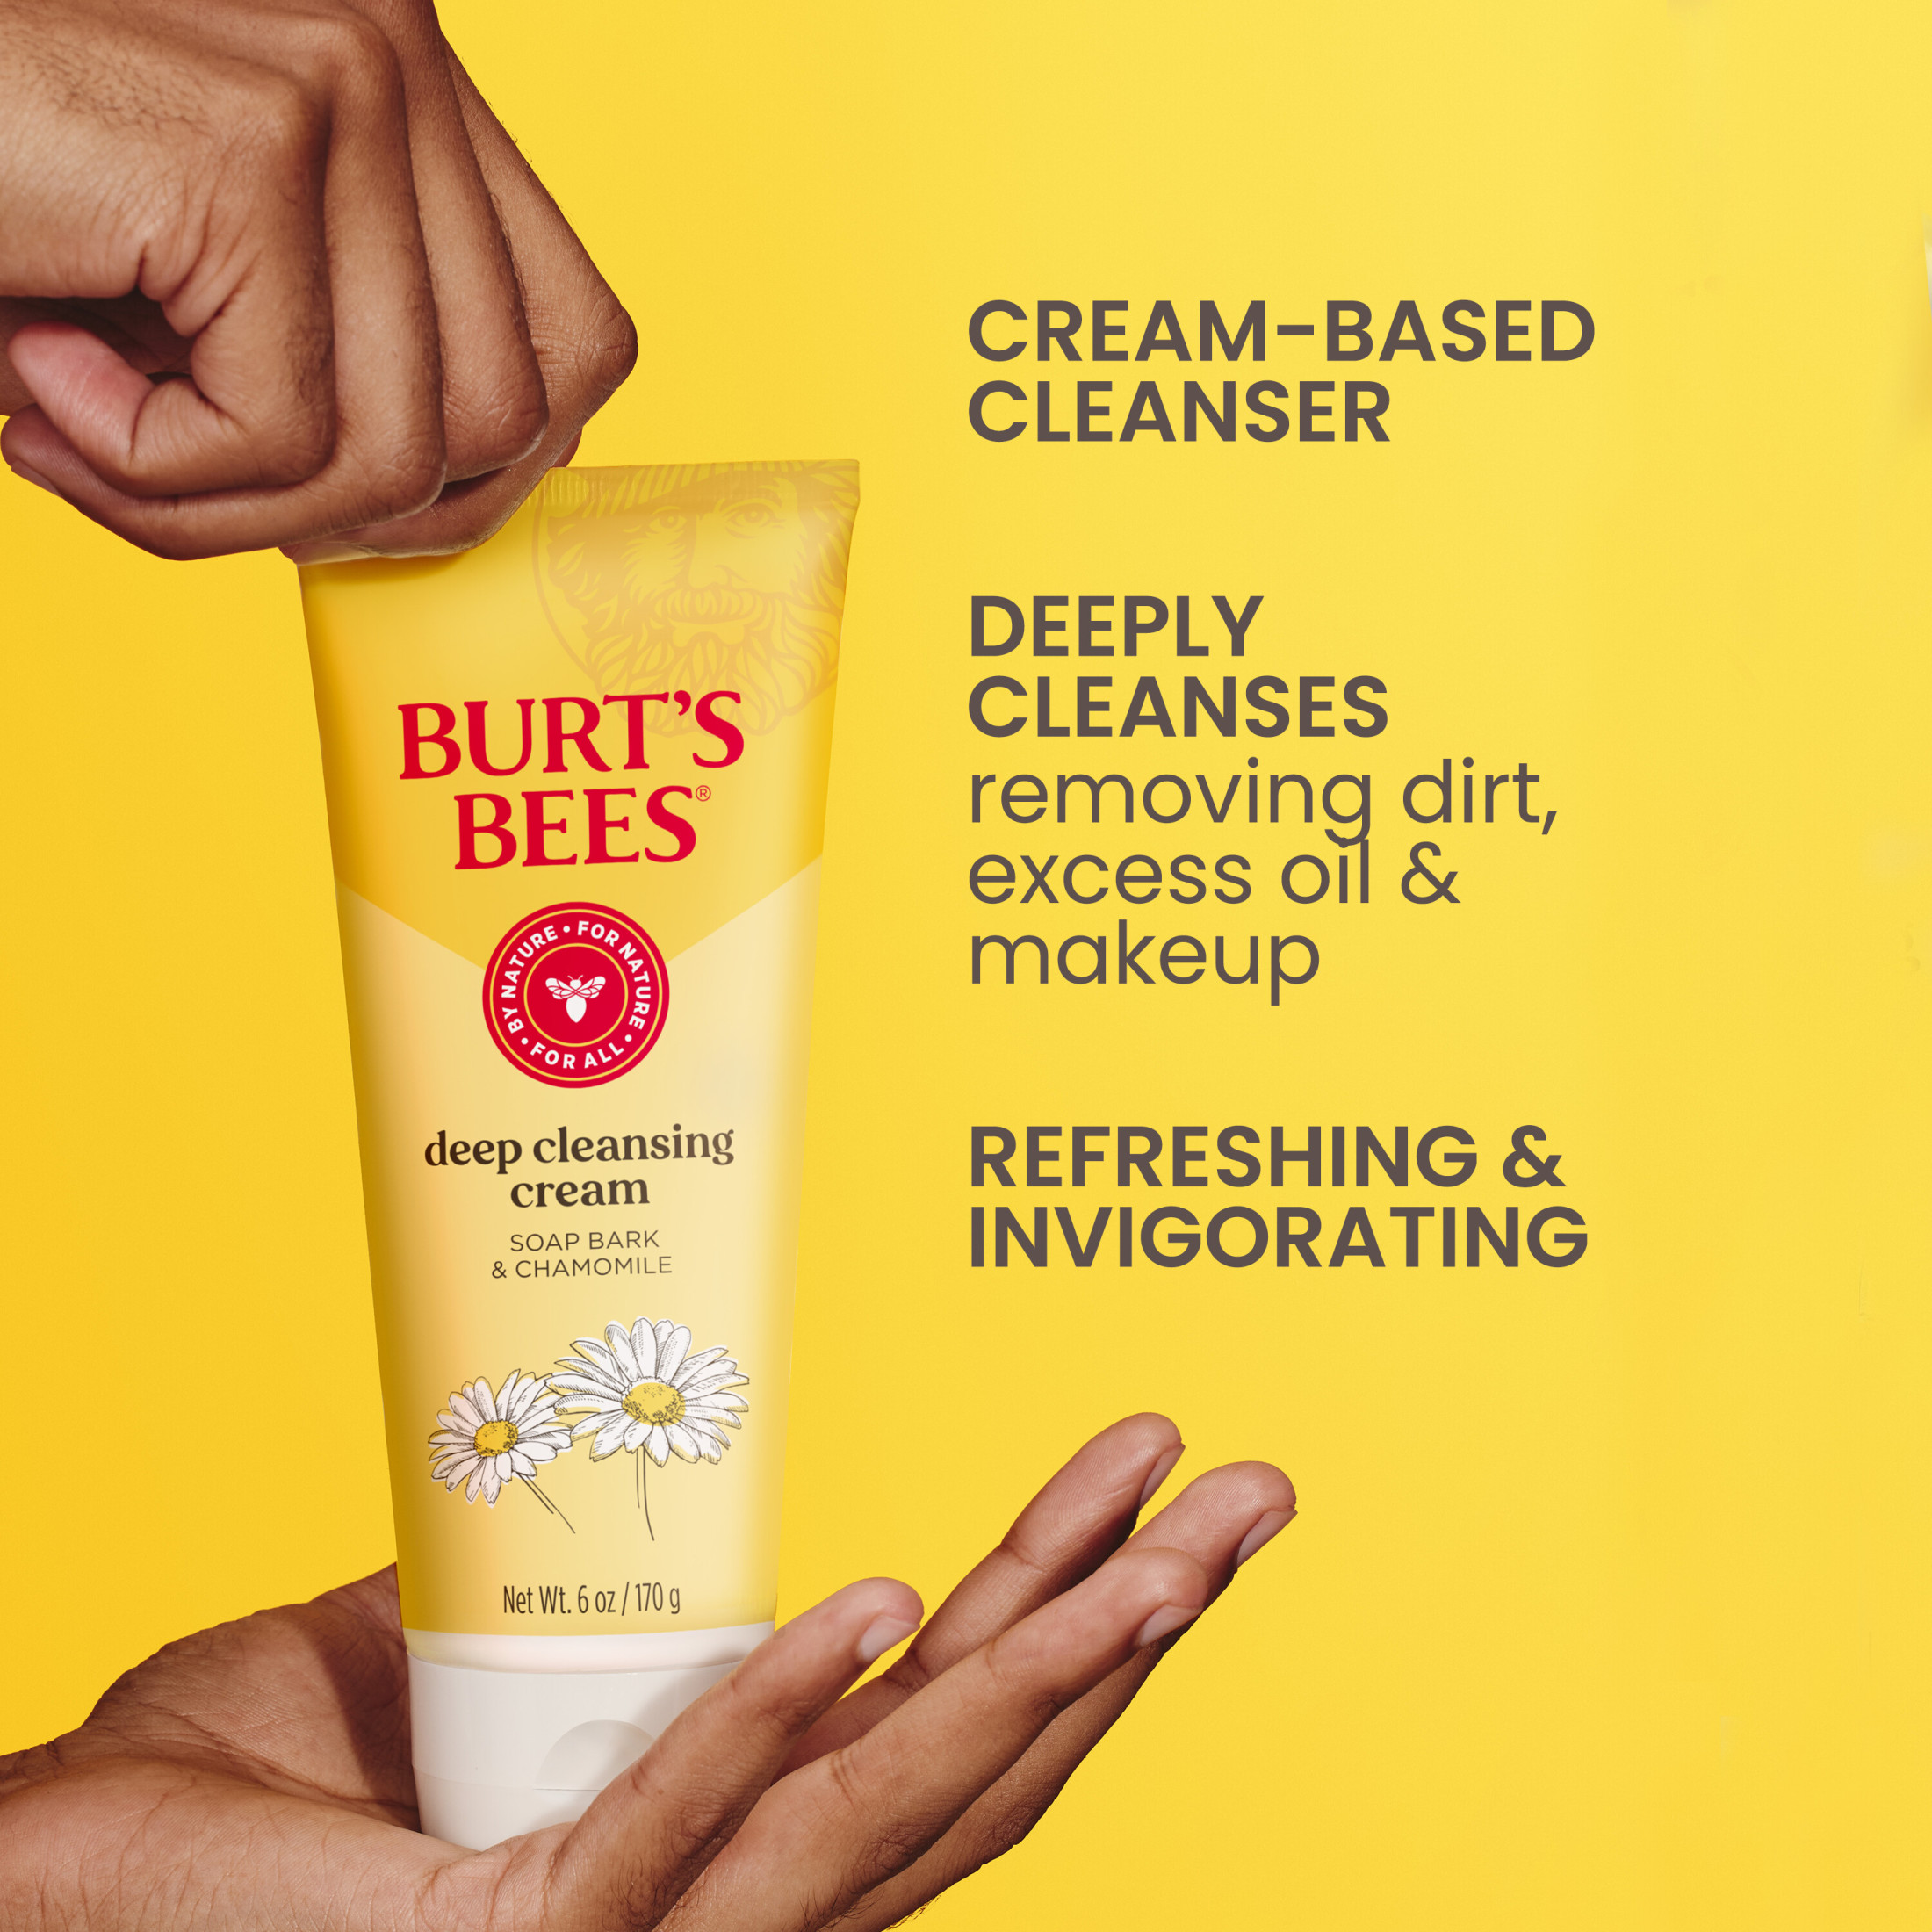 Burt's Bees Deep Cleansing Cream with Soap Bark and Chamomile, 6 Ounces - image 4 of 15